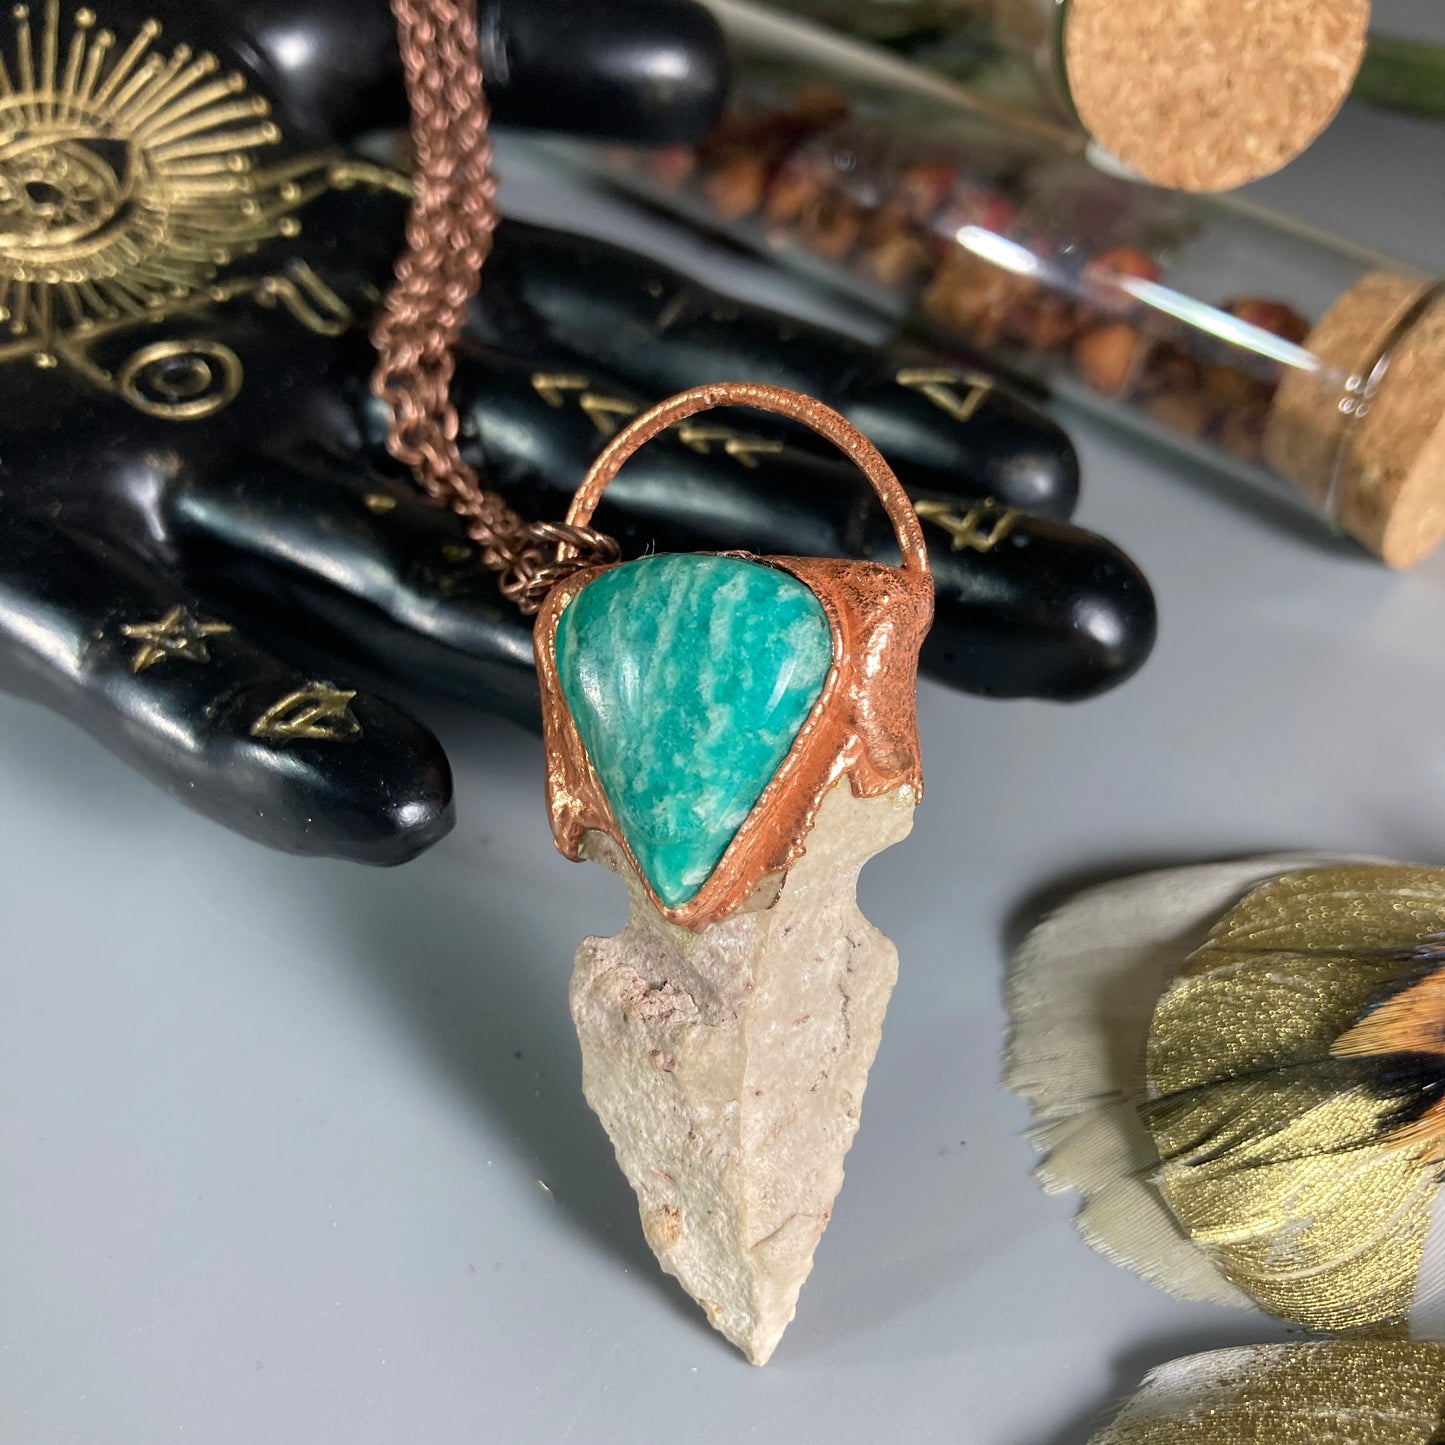 Ancient Relic Necklace ۞ Electrofomed Amazonite Crystal Pendant